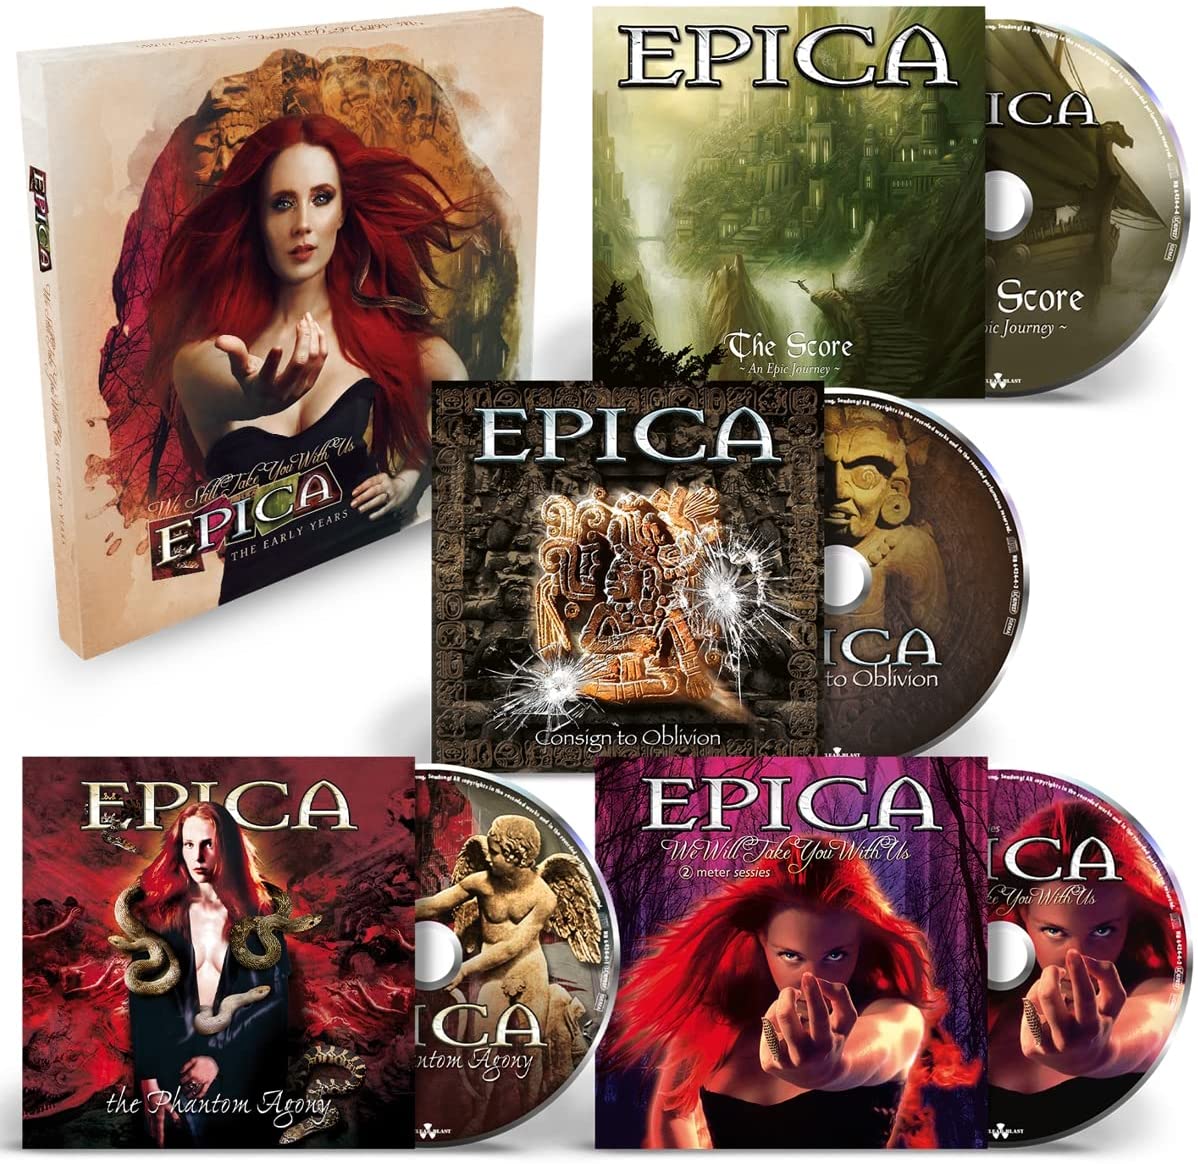 Epica "We Still Take You With Us" Deluxe 4 CD Clam Box Set